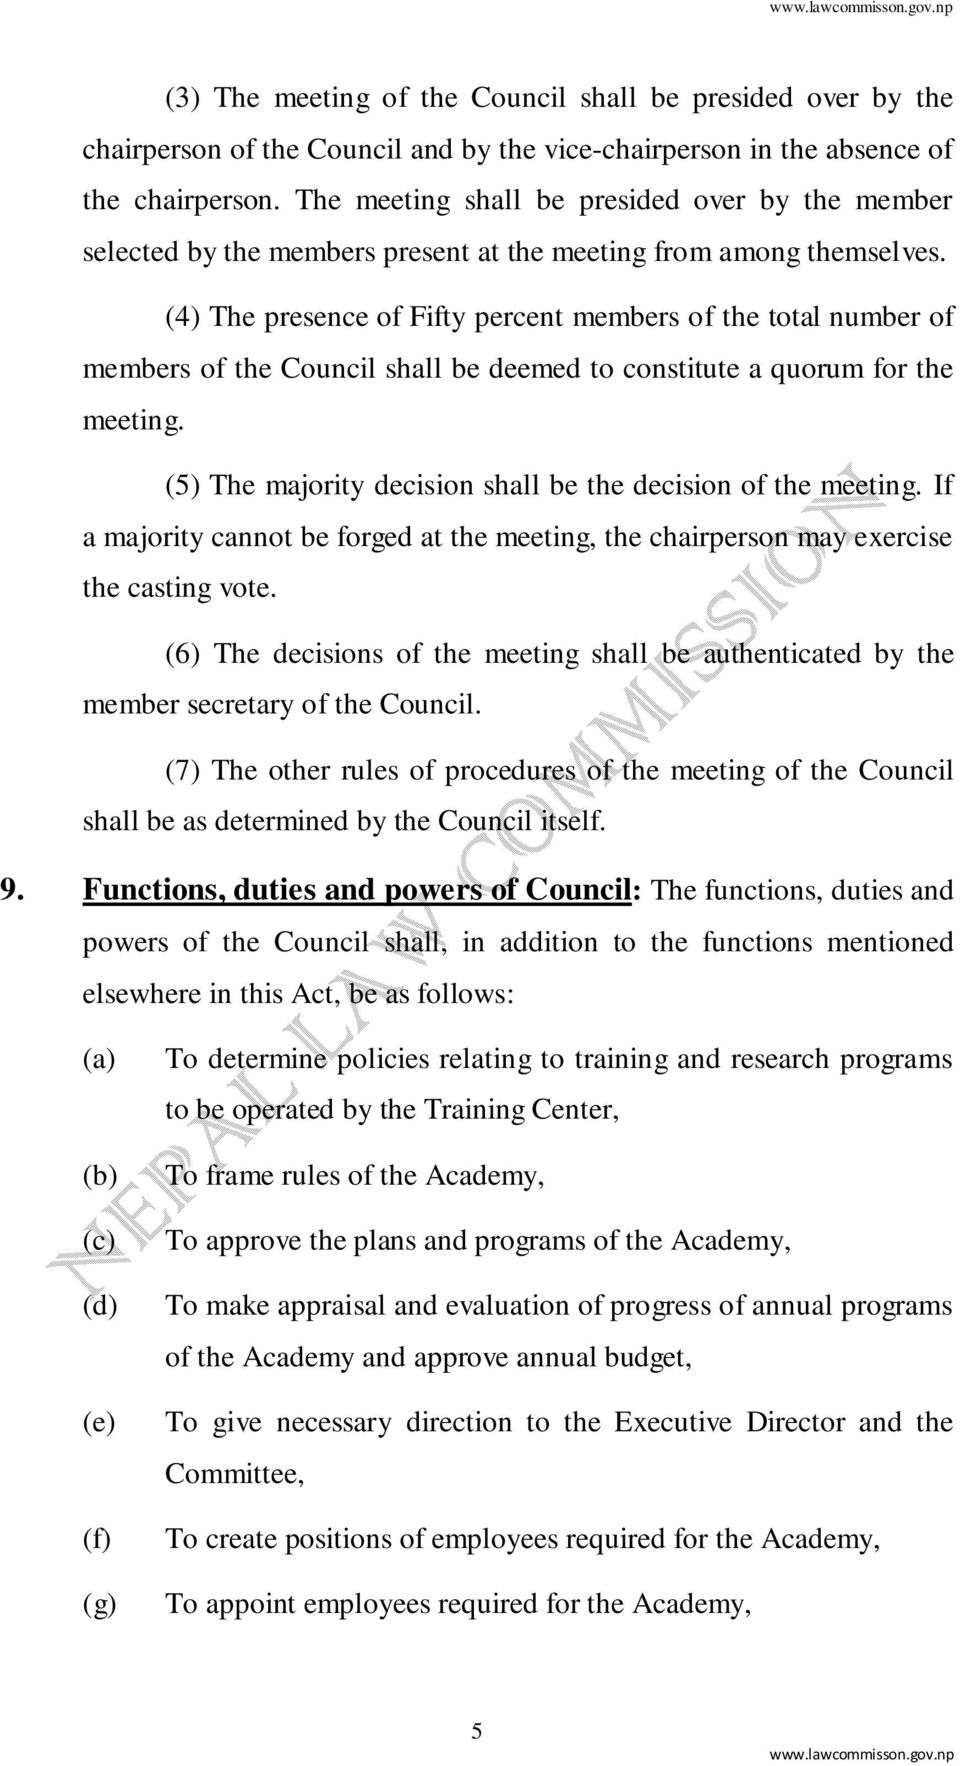 (4) The presence of Fifty percent members of the total number of members of the Council shall be deemed to constitute a quorum for the meeting.